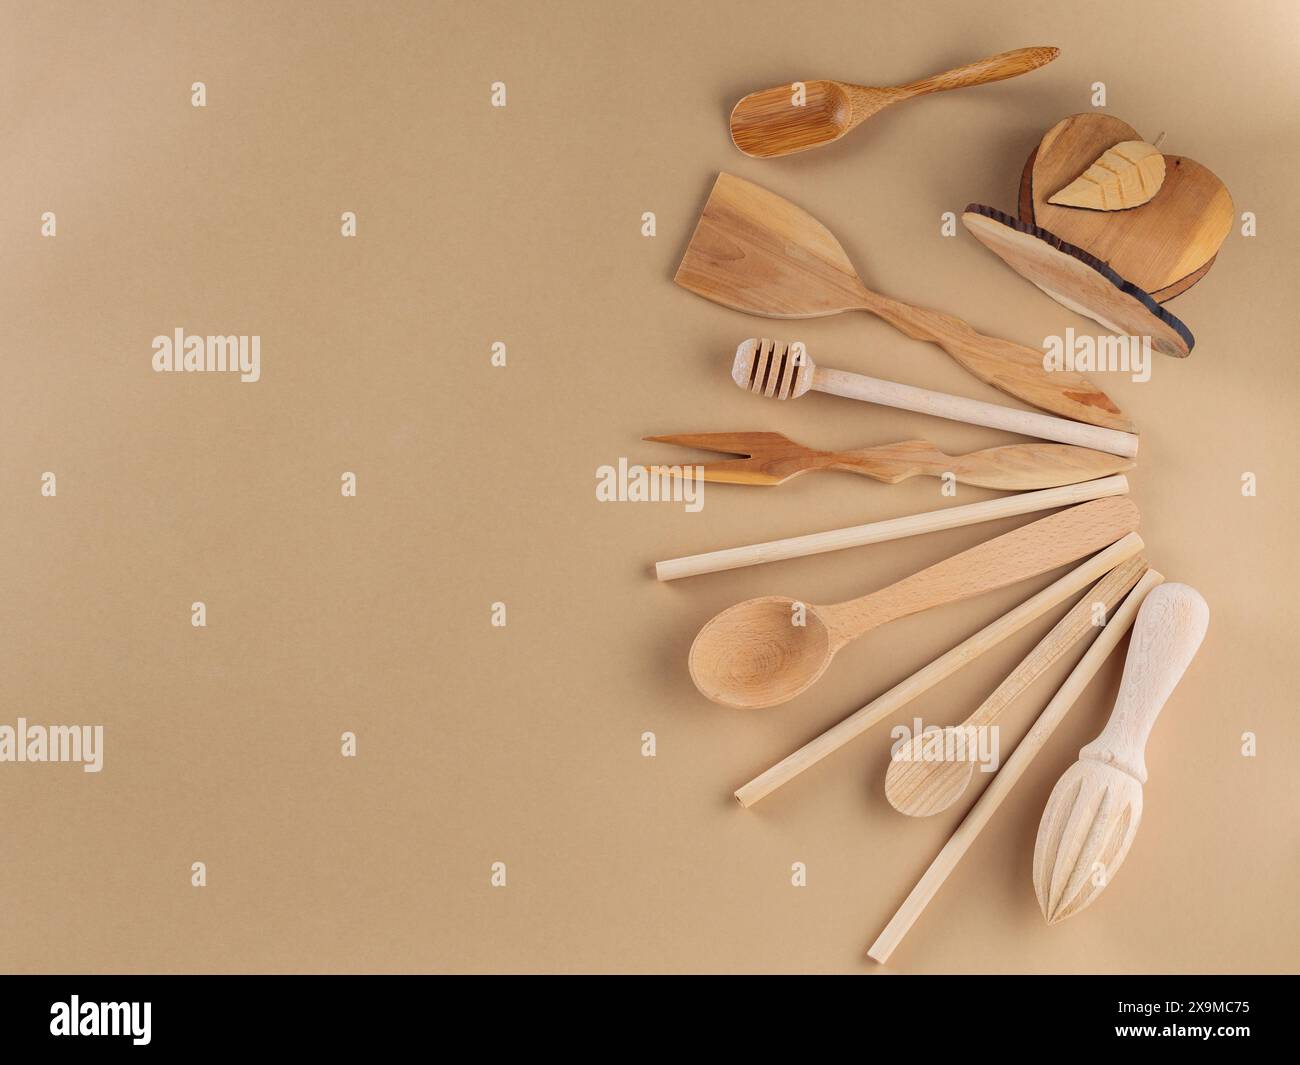 Wooden Cutlery Set with Spatula, Spoon, Bamboo Straws, Manual Juicer and Honey Stick on Beige Background Stock Photo